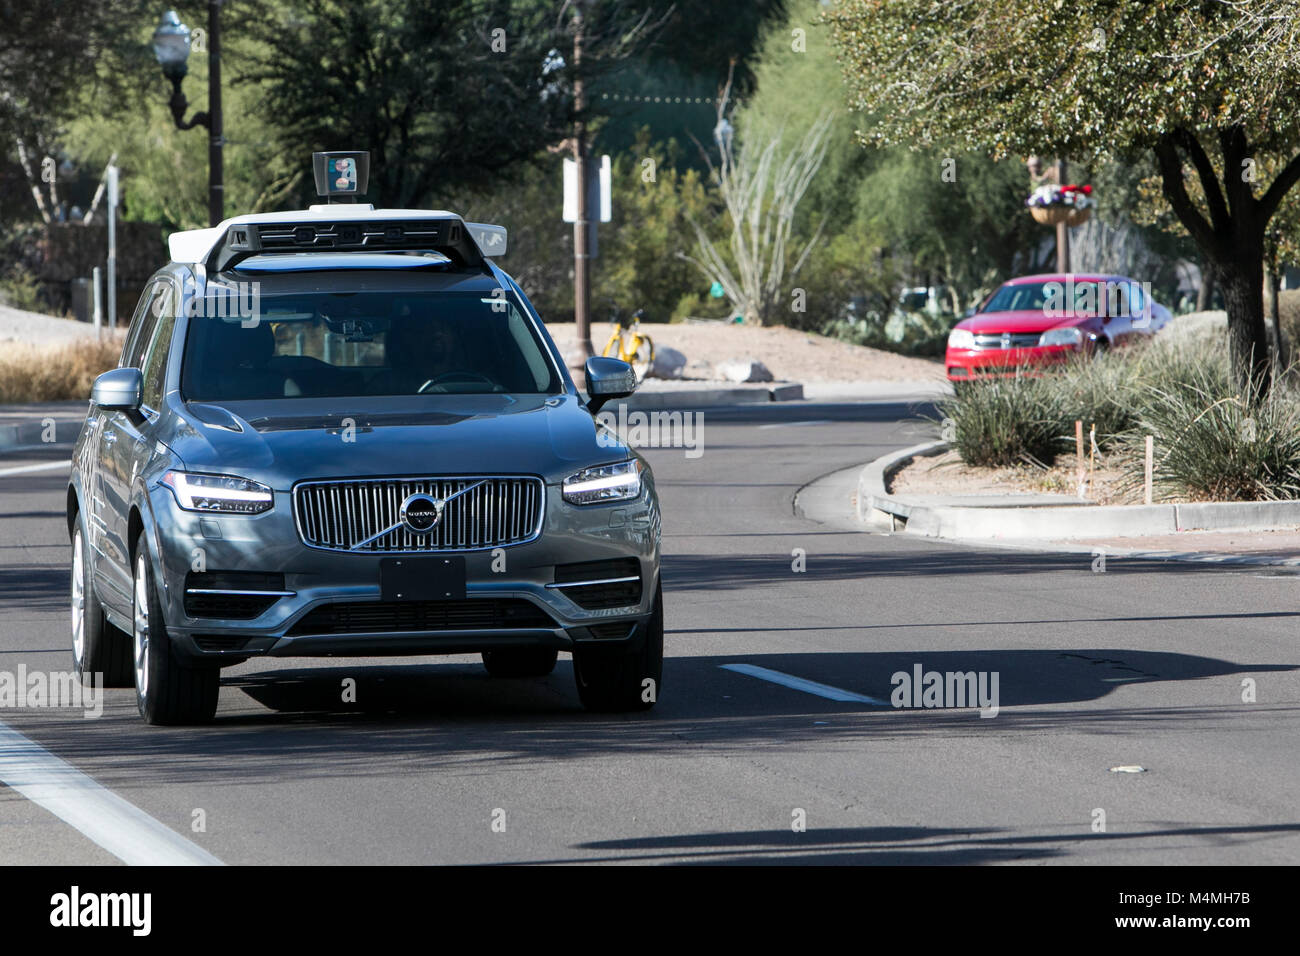 An Uber self-driving autonomous vehicle seen driving in Tempe, Arizona on February 3, 2018. Stock Photo